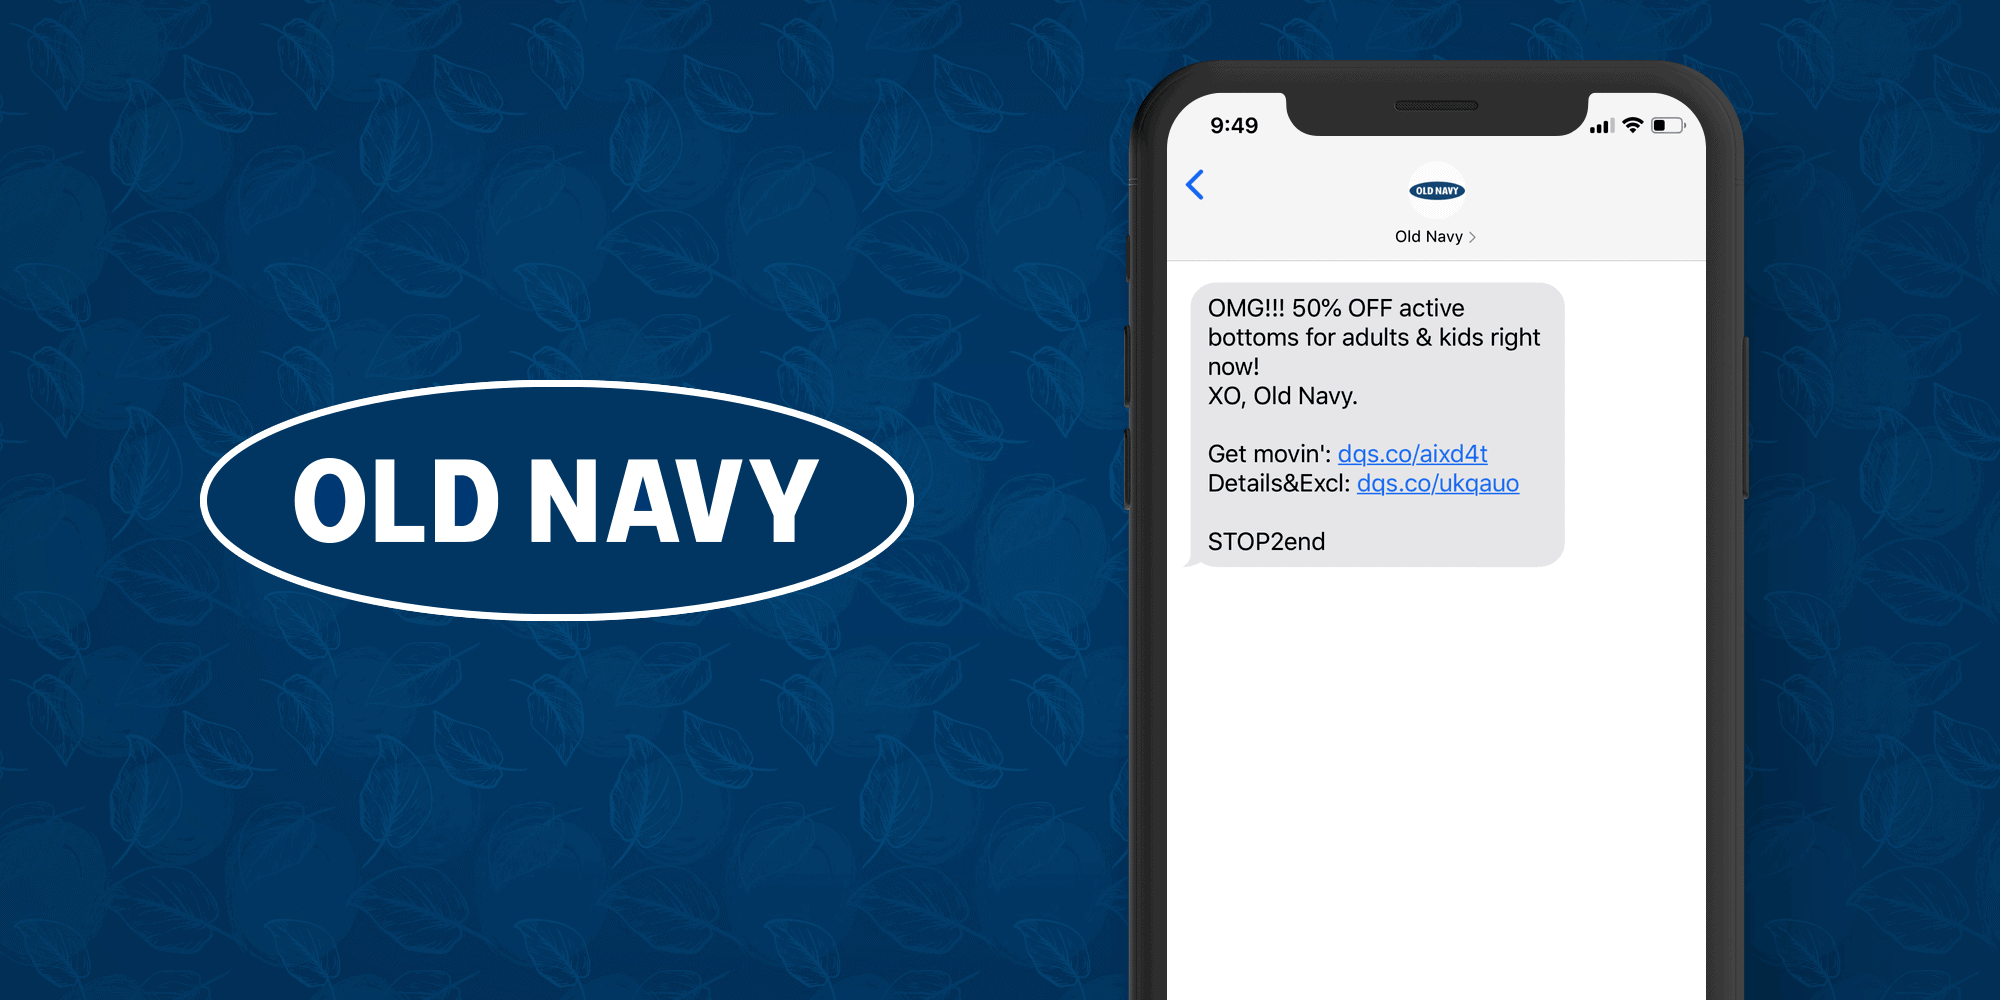 old navy sms marketing text message example